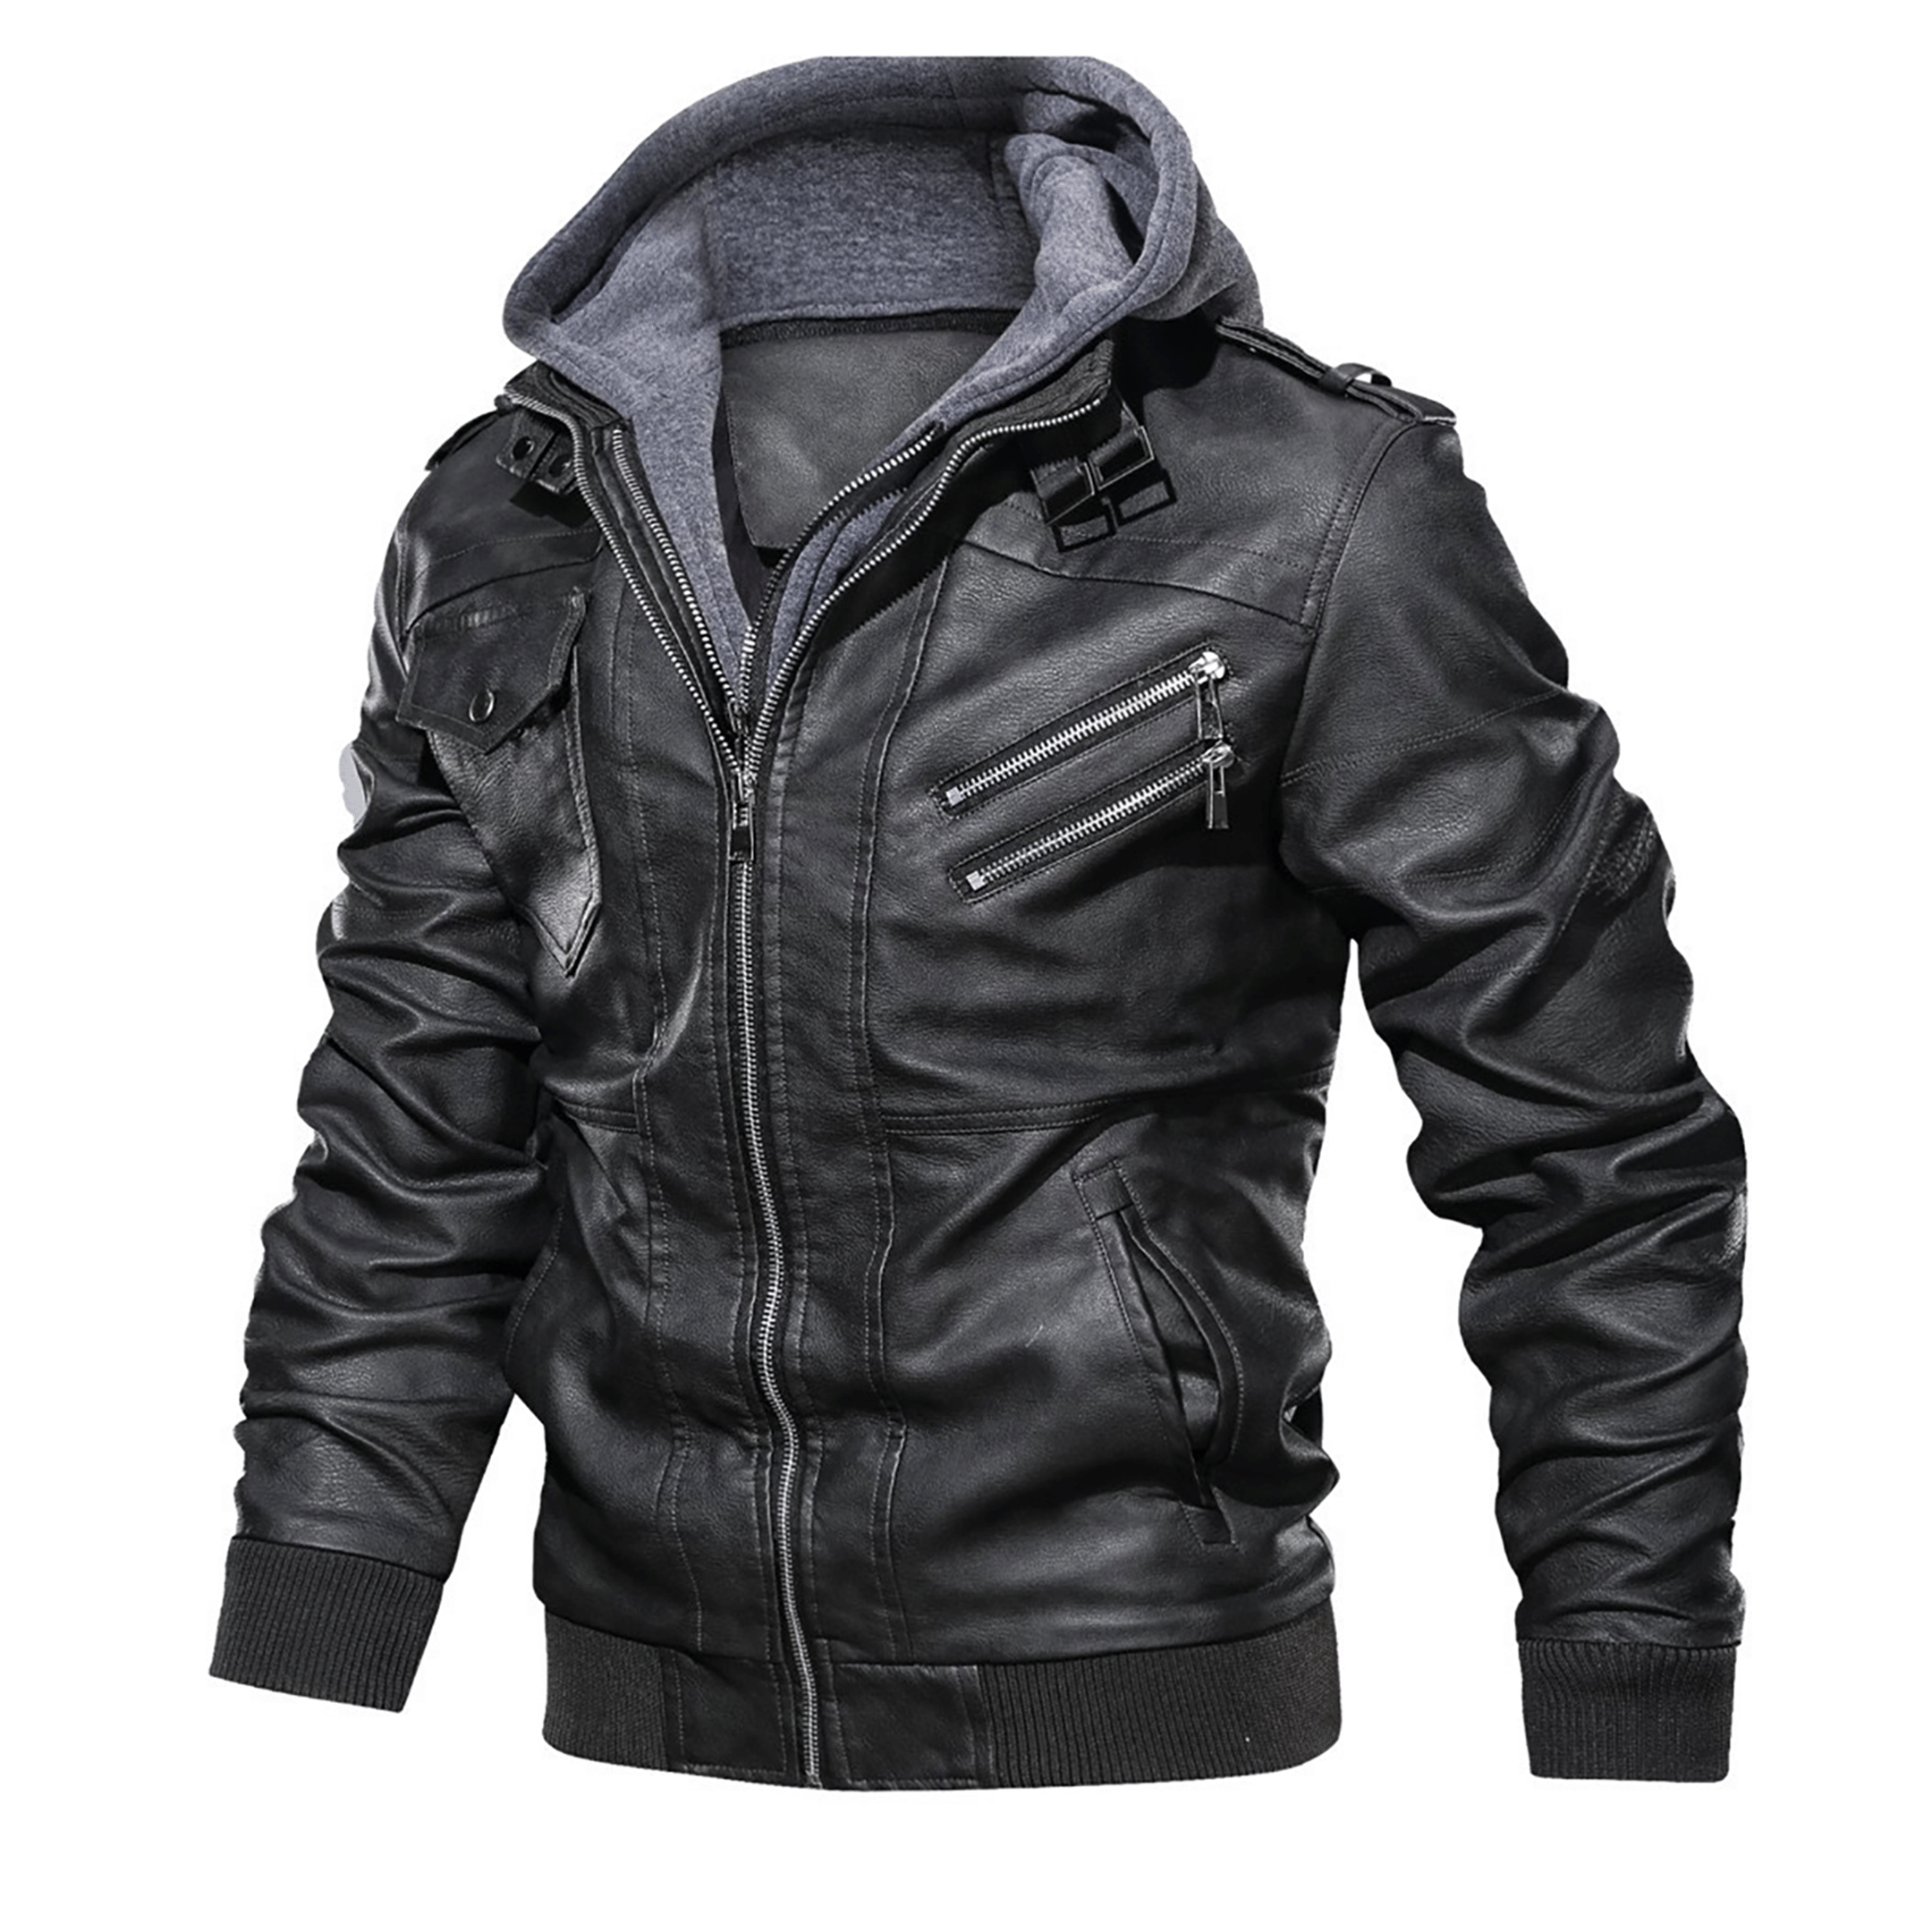 Top leather jackets and latest products 447